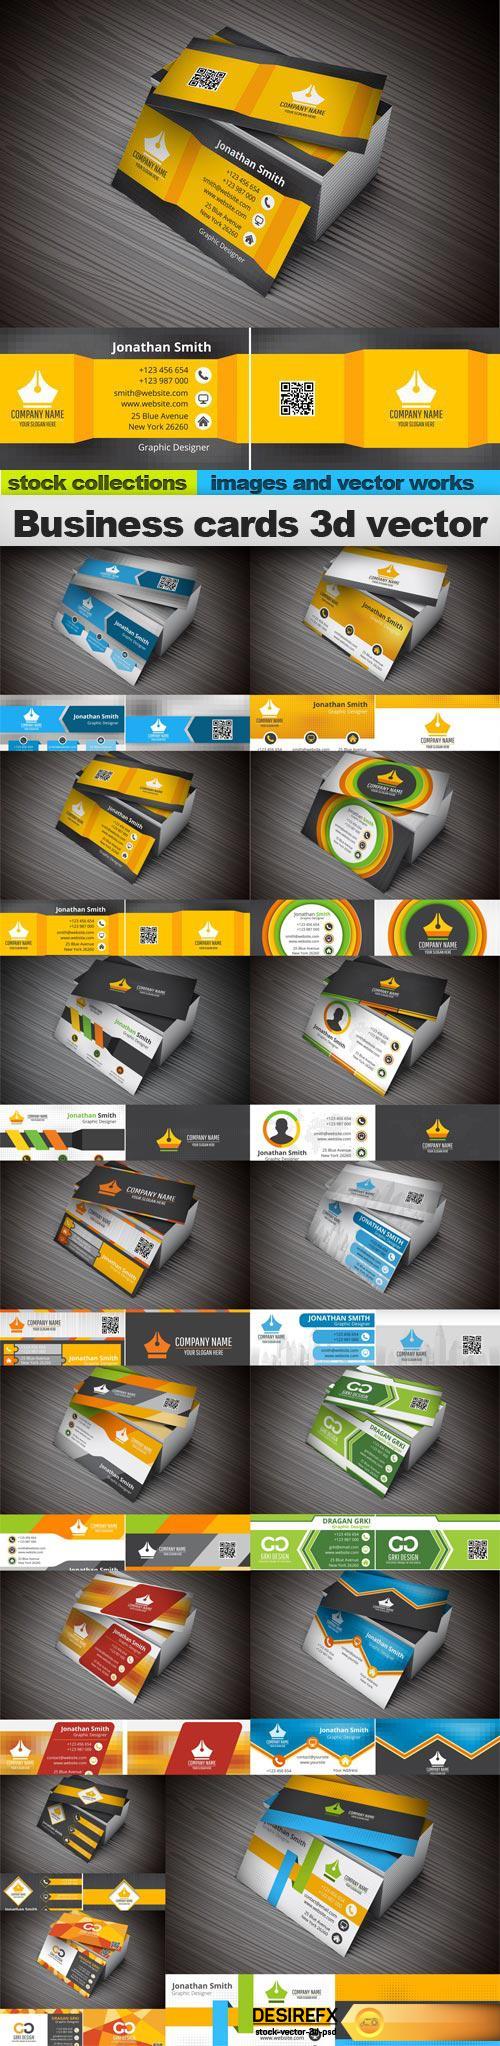 Business cards 3d vector, 15 x EPS